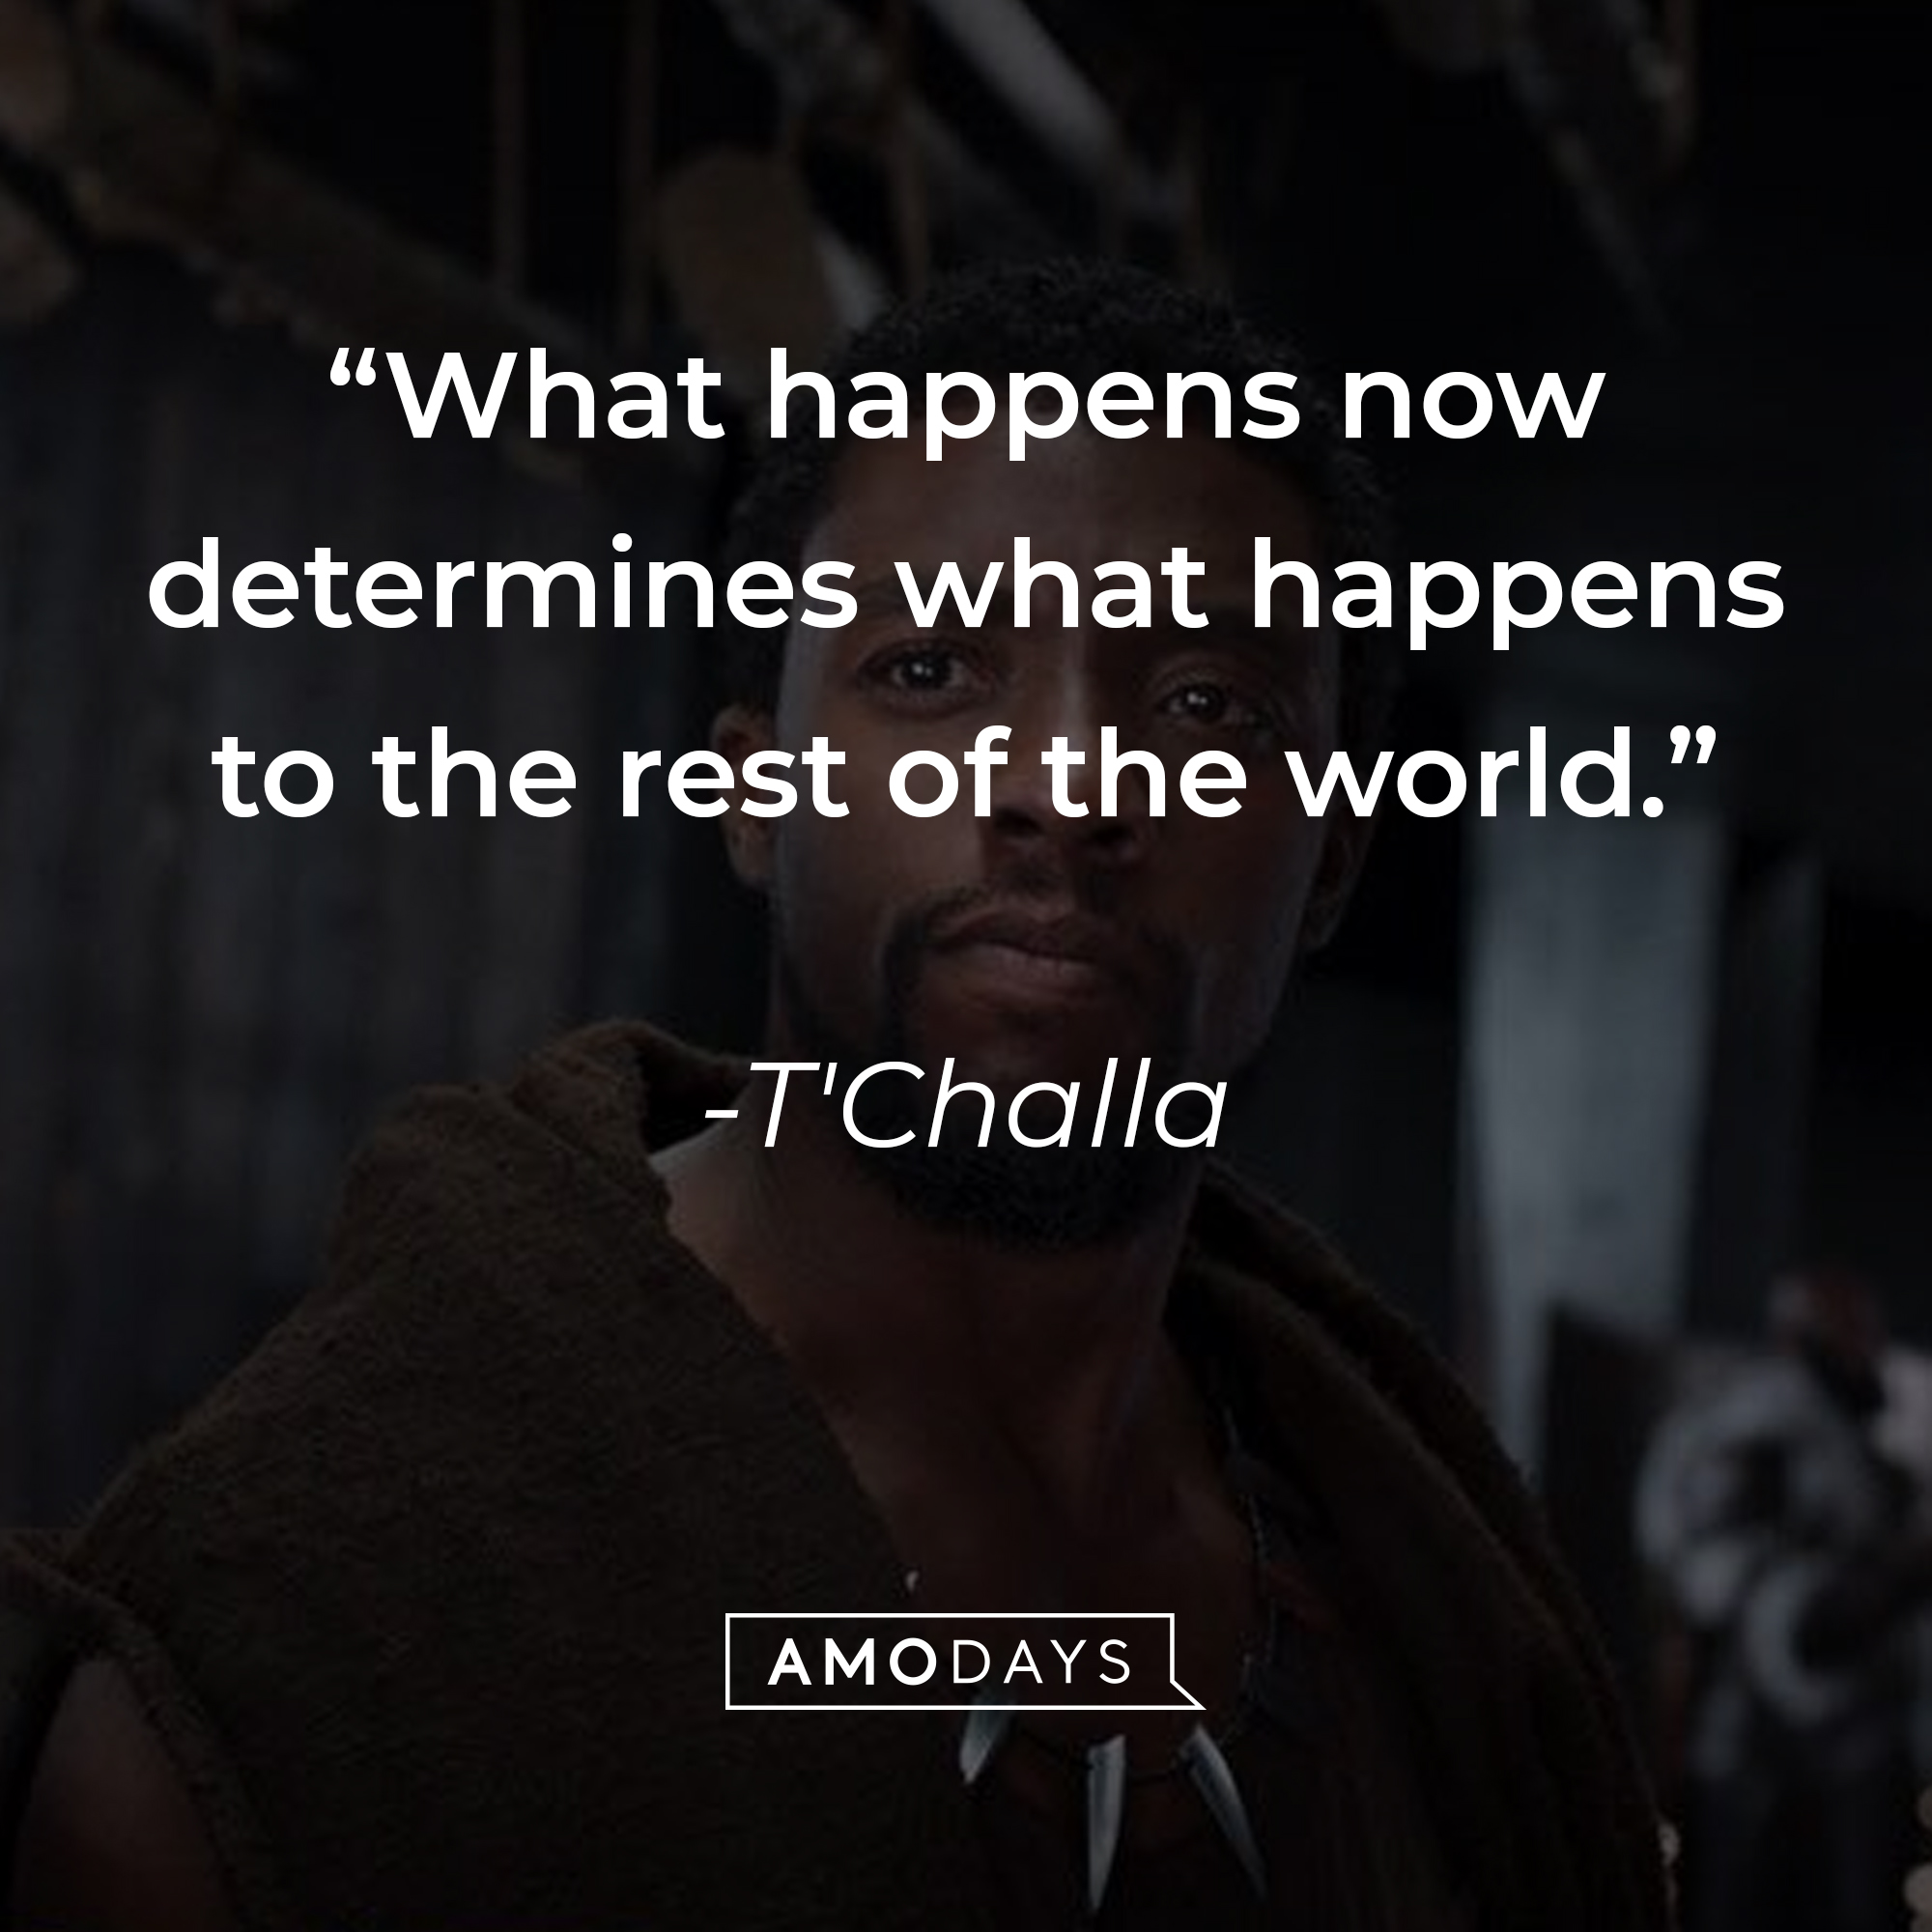 T'Challa's quote: “What happens now determines what happens to the rest of the world.” | Source: facebook.com/BlackPantherMovie